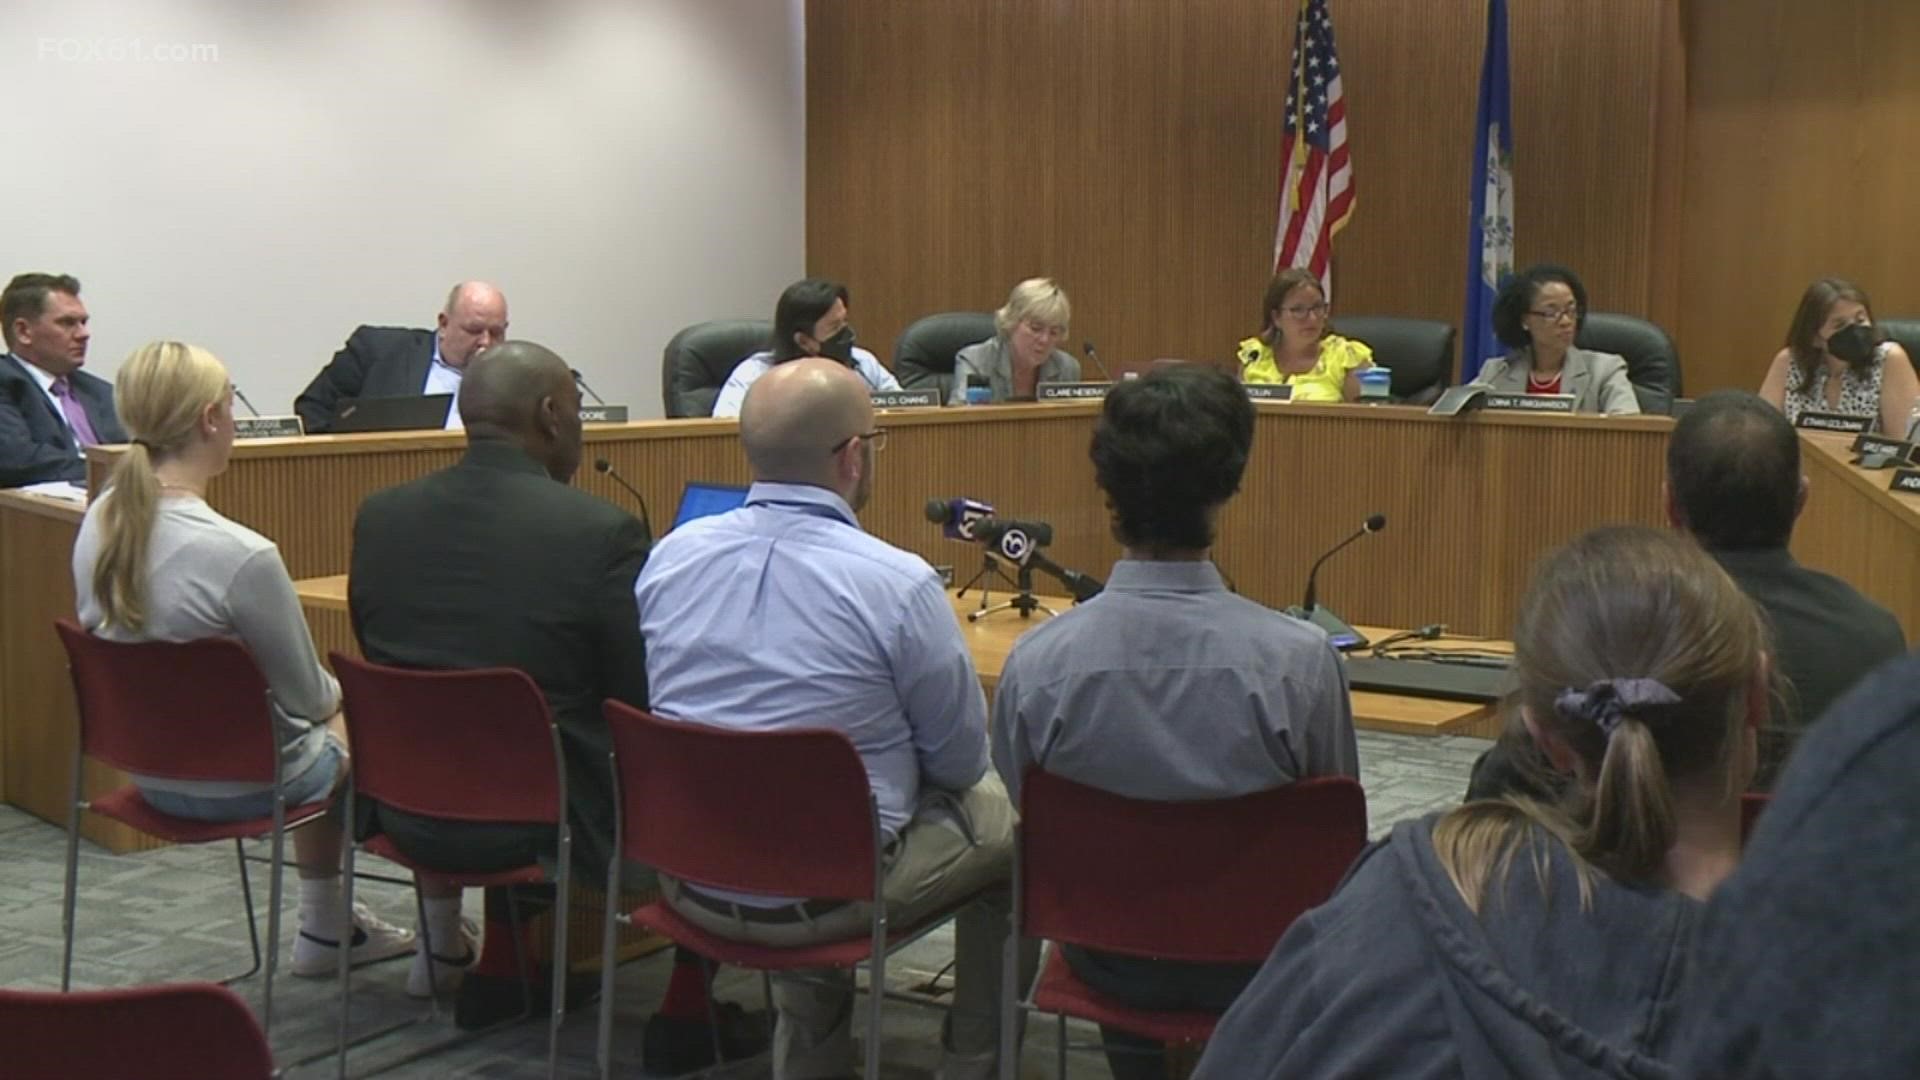 The West Hartford Board of Education voted to change high school names.